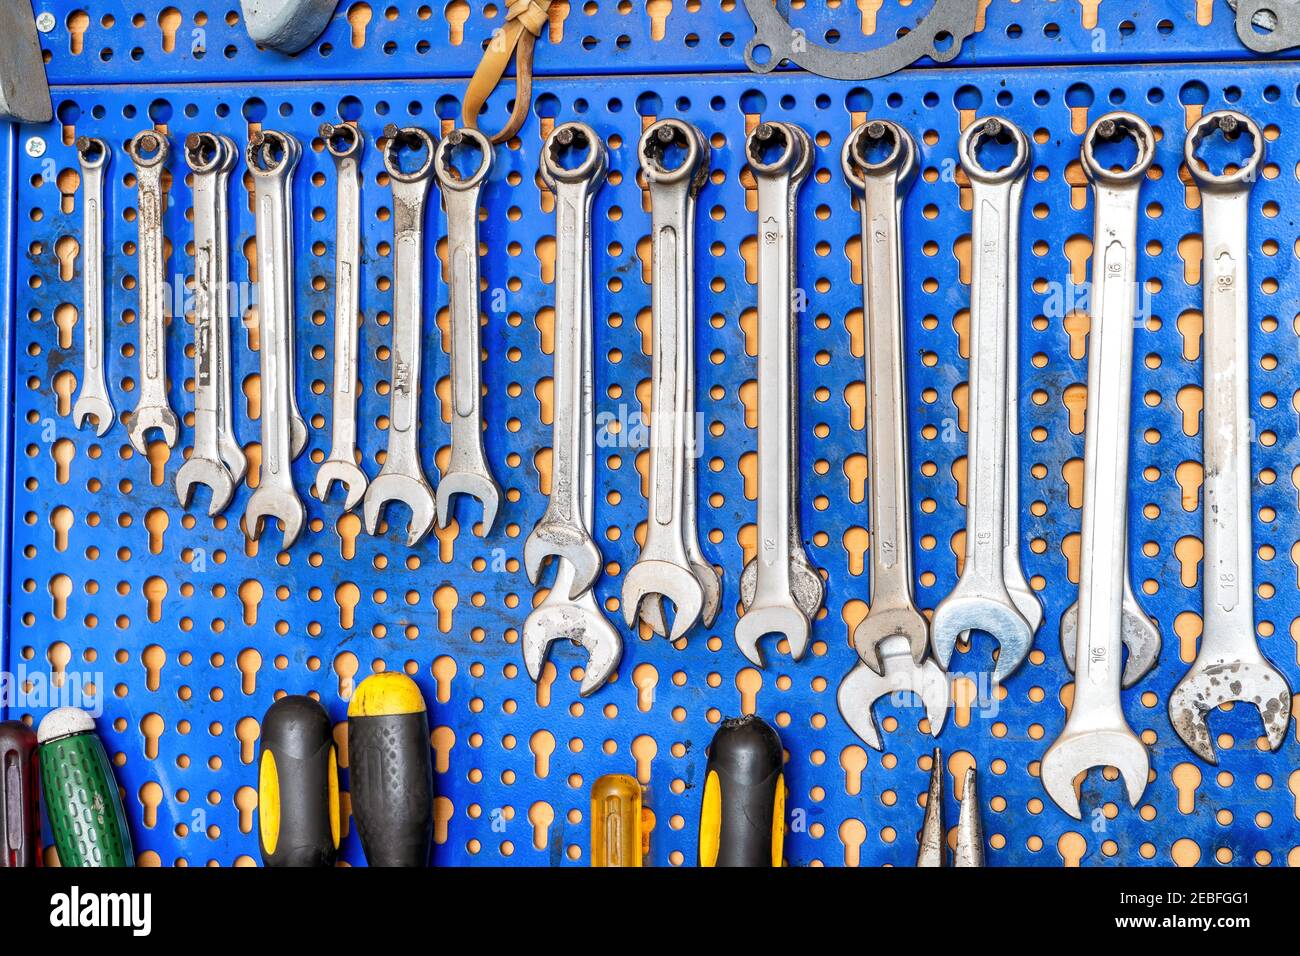 A range of used mechanic tools, from combination wrenches to screwdrivers. All hanging on blue panels. Perfect shot for arts and crafts. Stock Photo